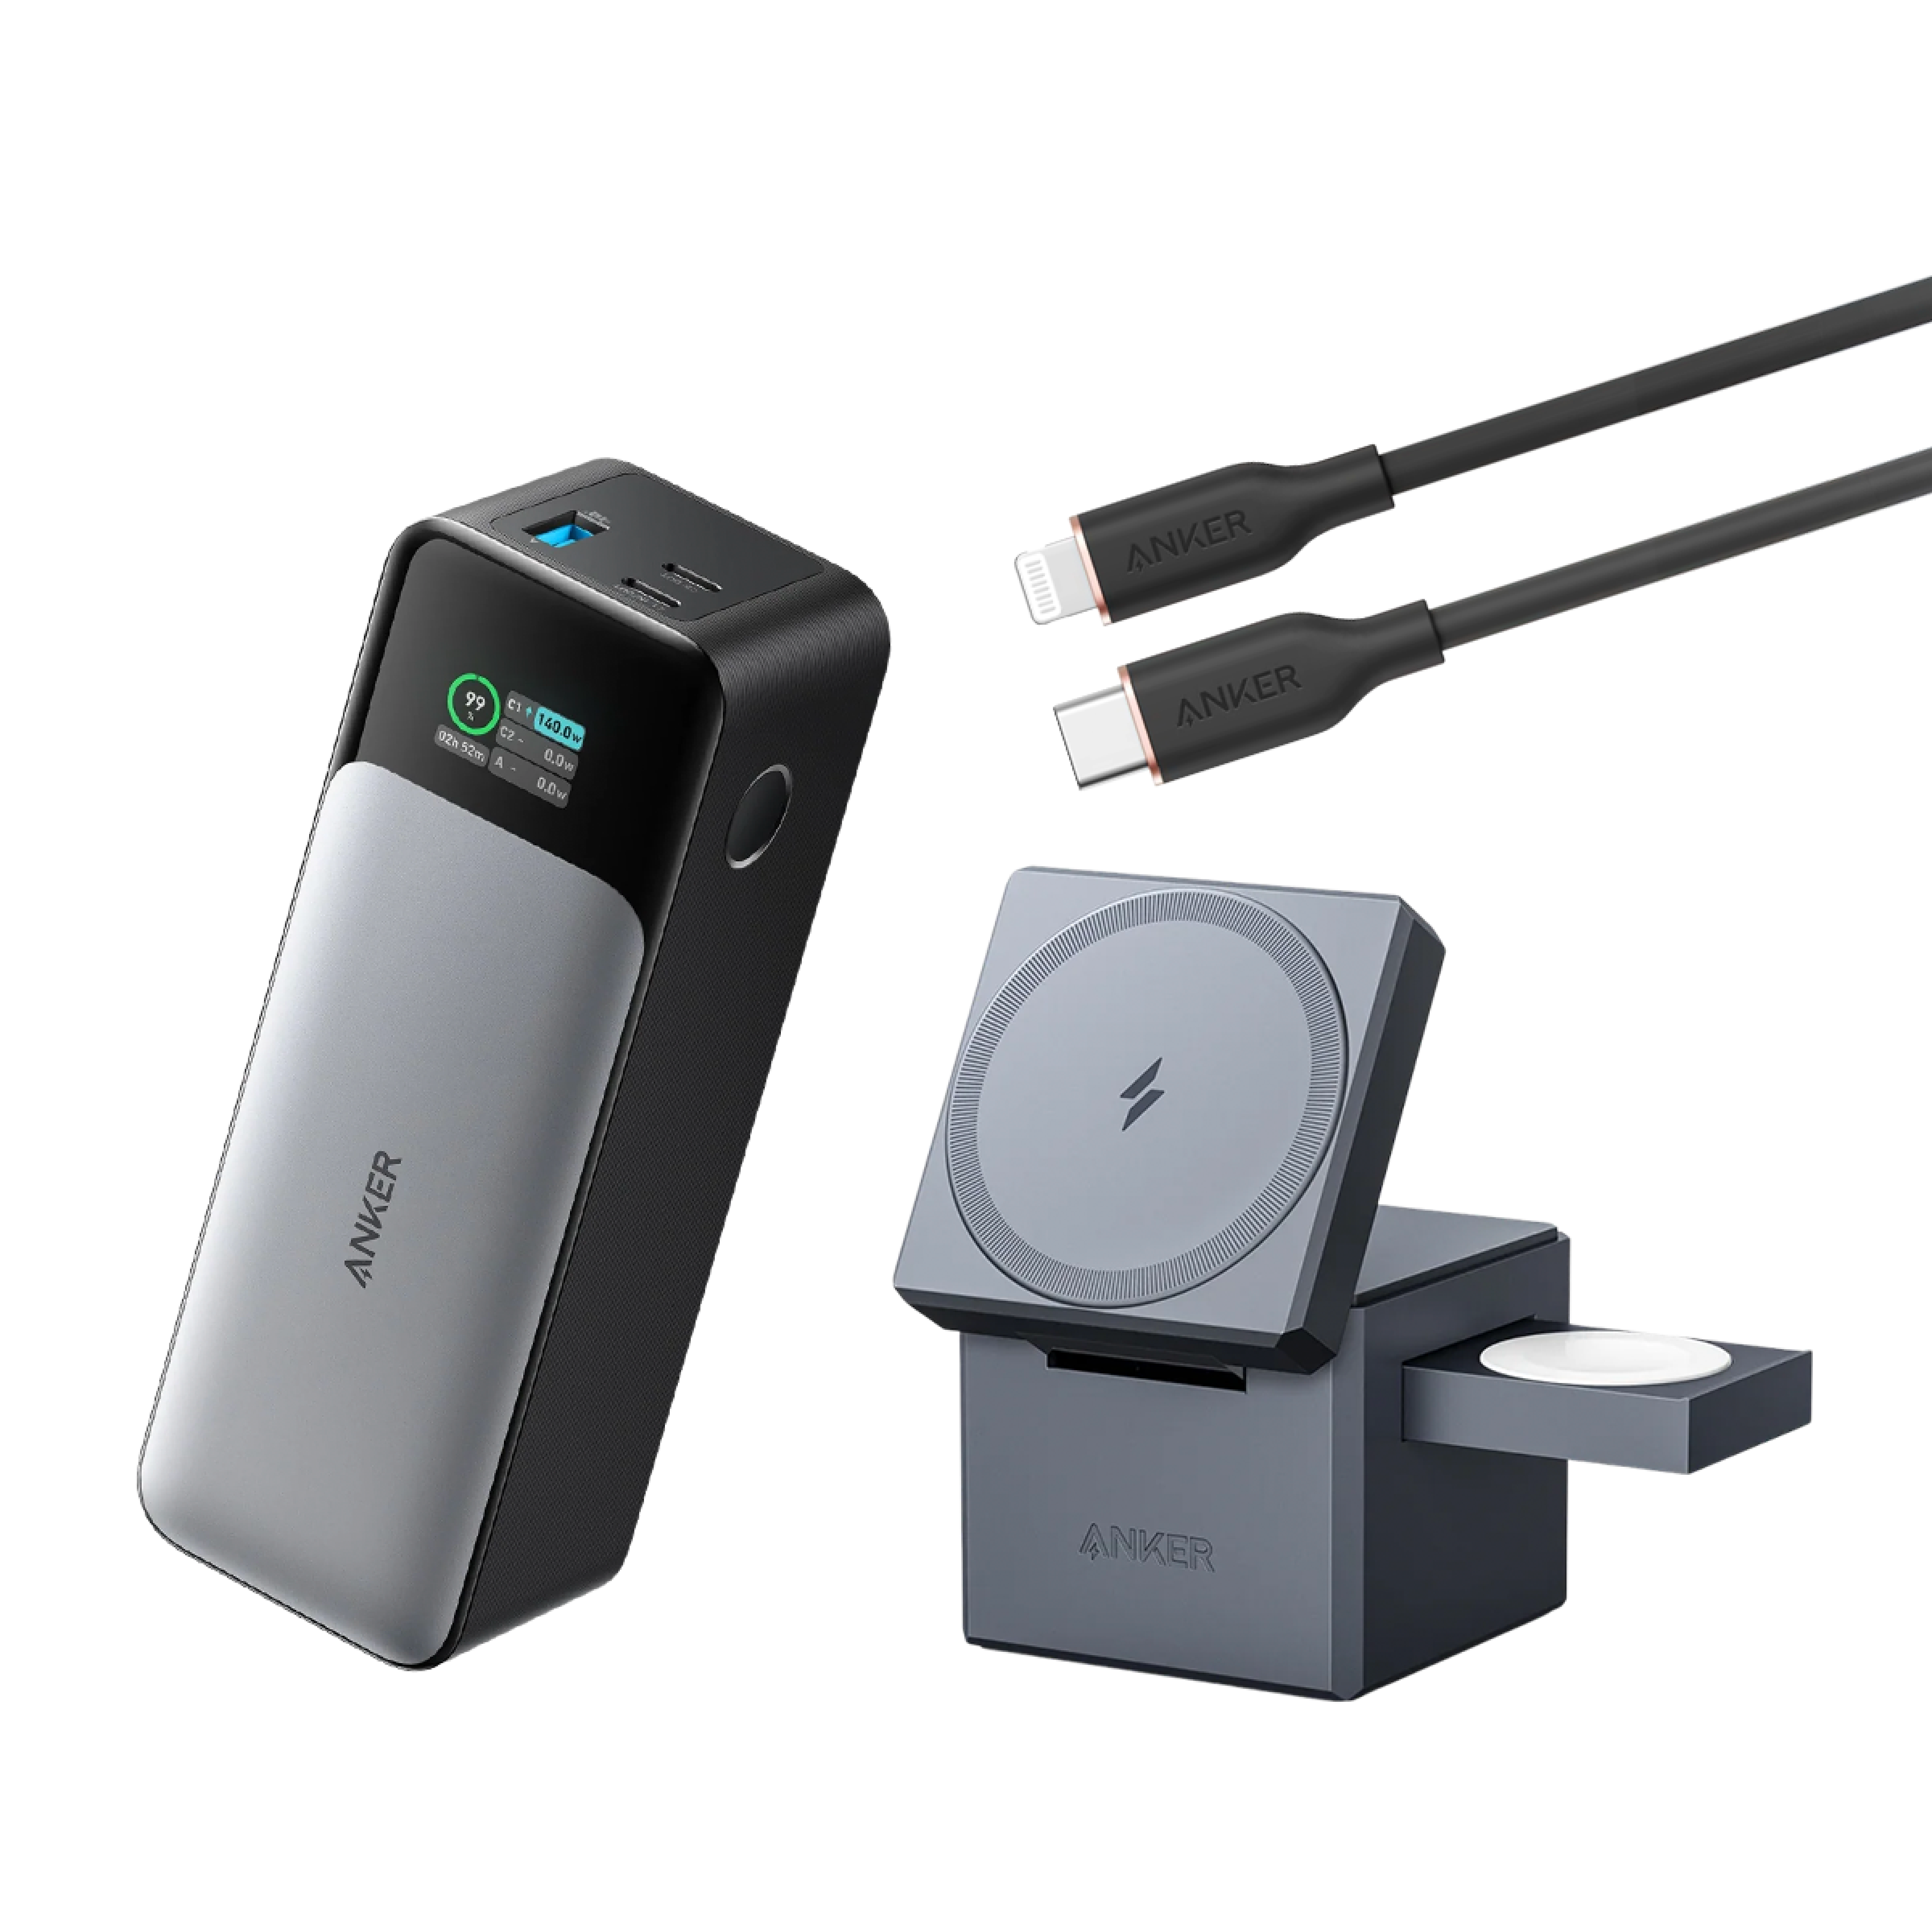 UGREEN's new 10,000mAh MagSafe battery pack charges 3 devices at once, now  $48